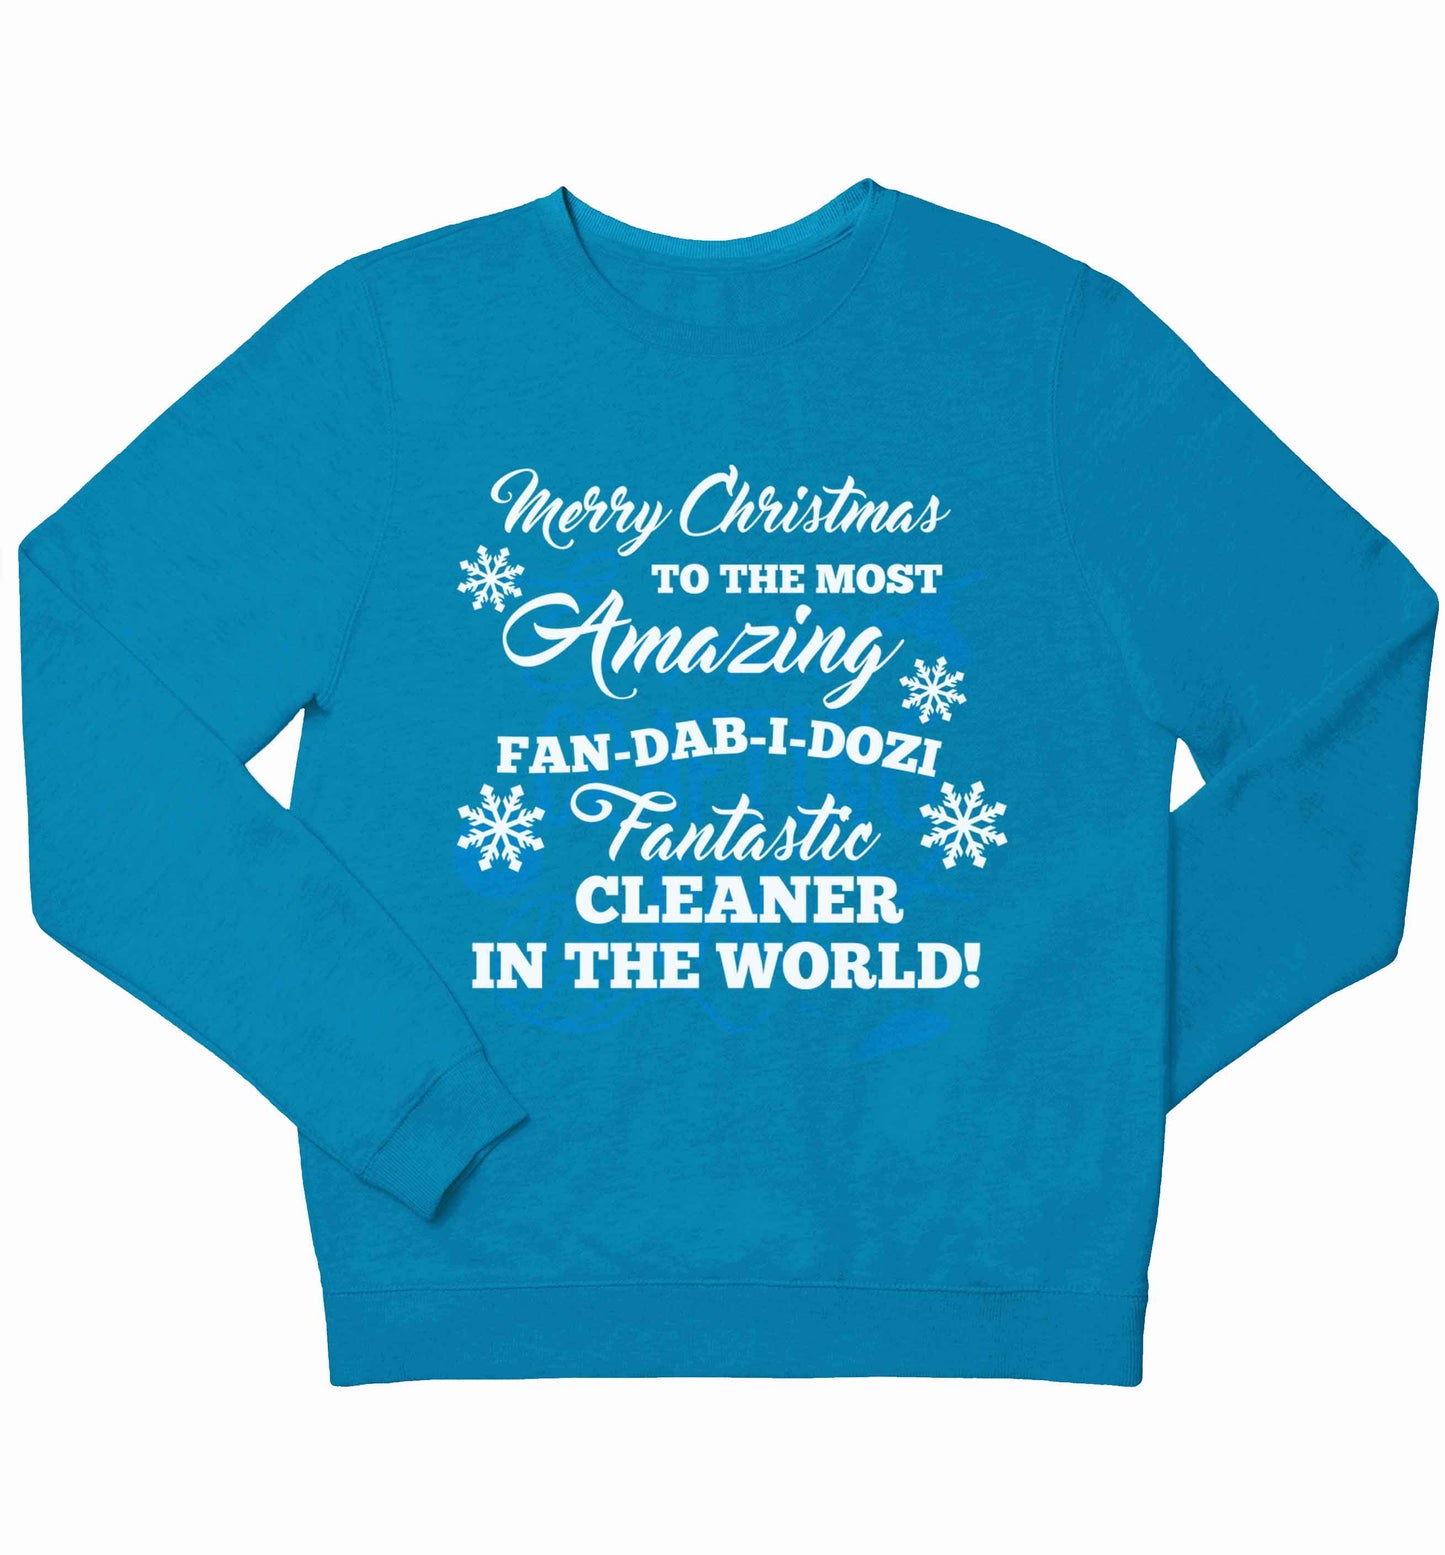 Merry Christmas to the most amazing fan-dab-i-dozi fantasic cleaner in the world children's blue sweater 12-13 Years